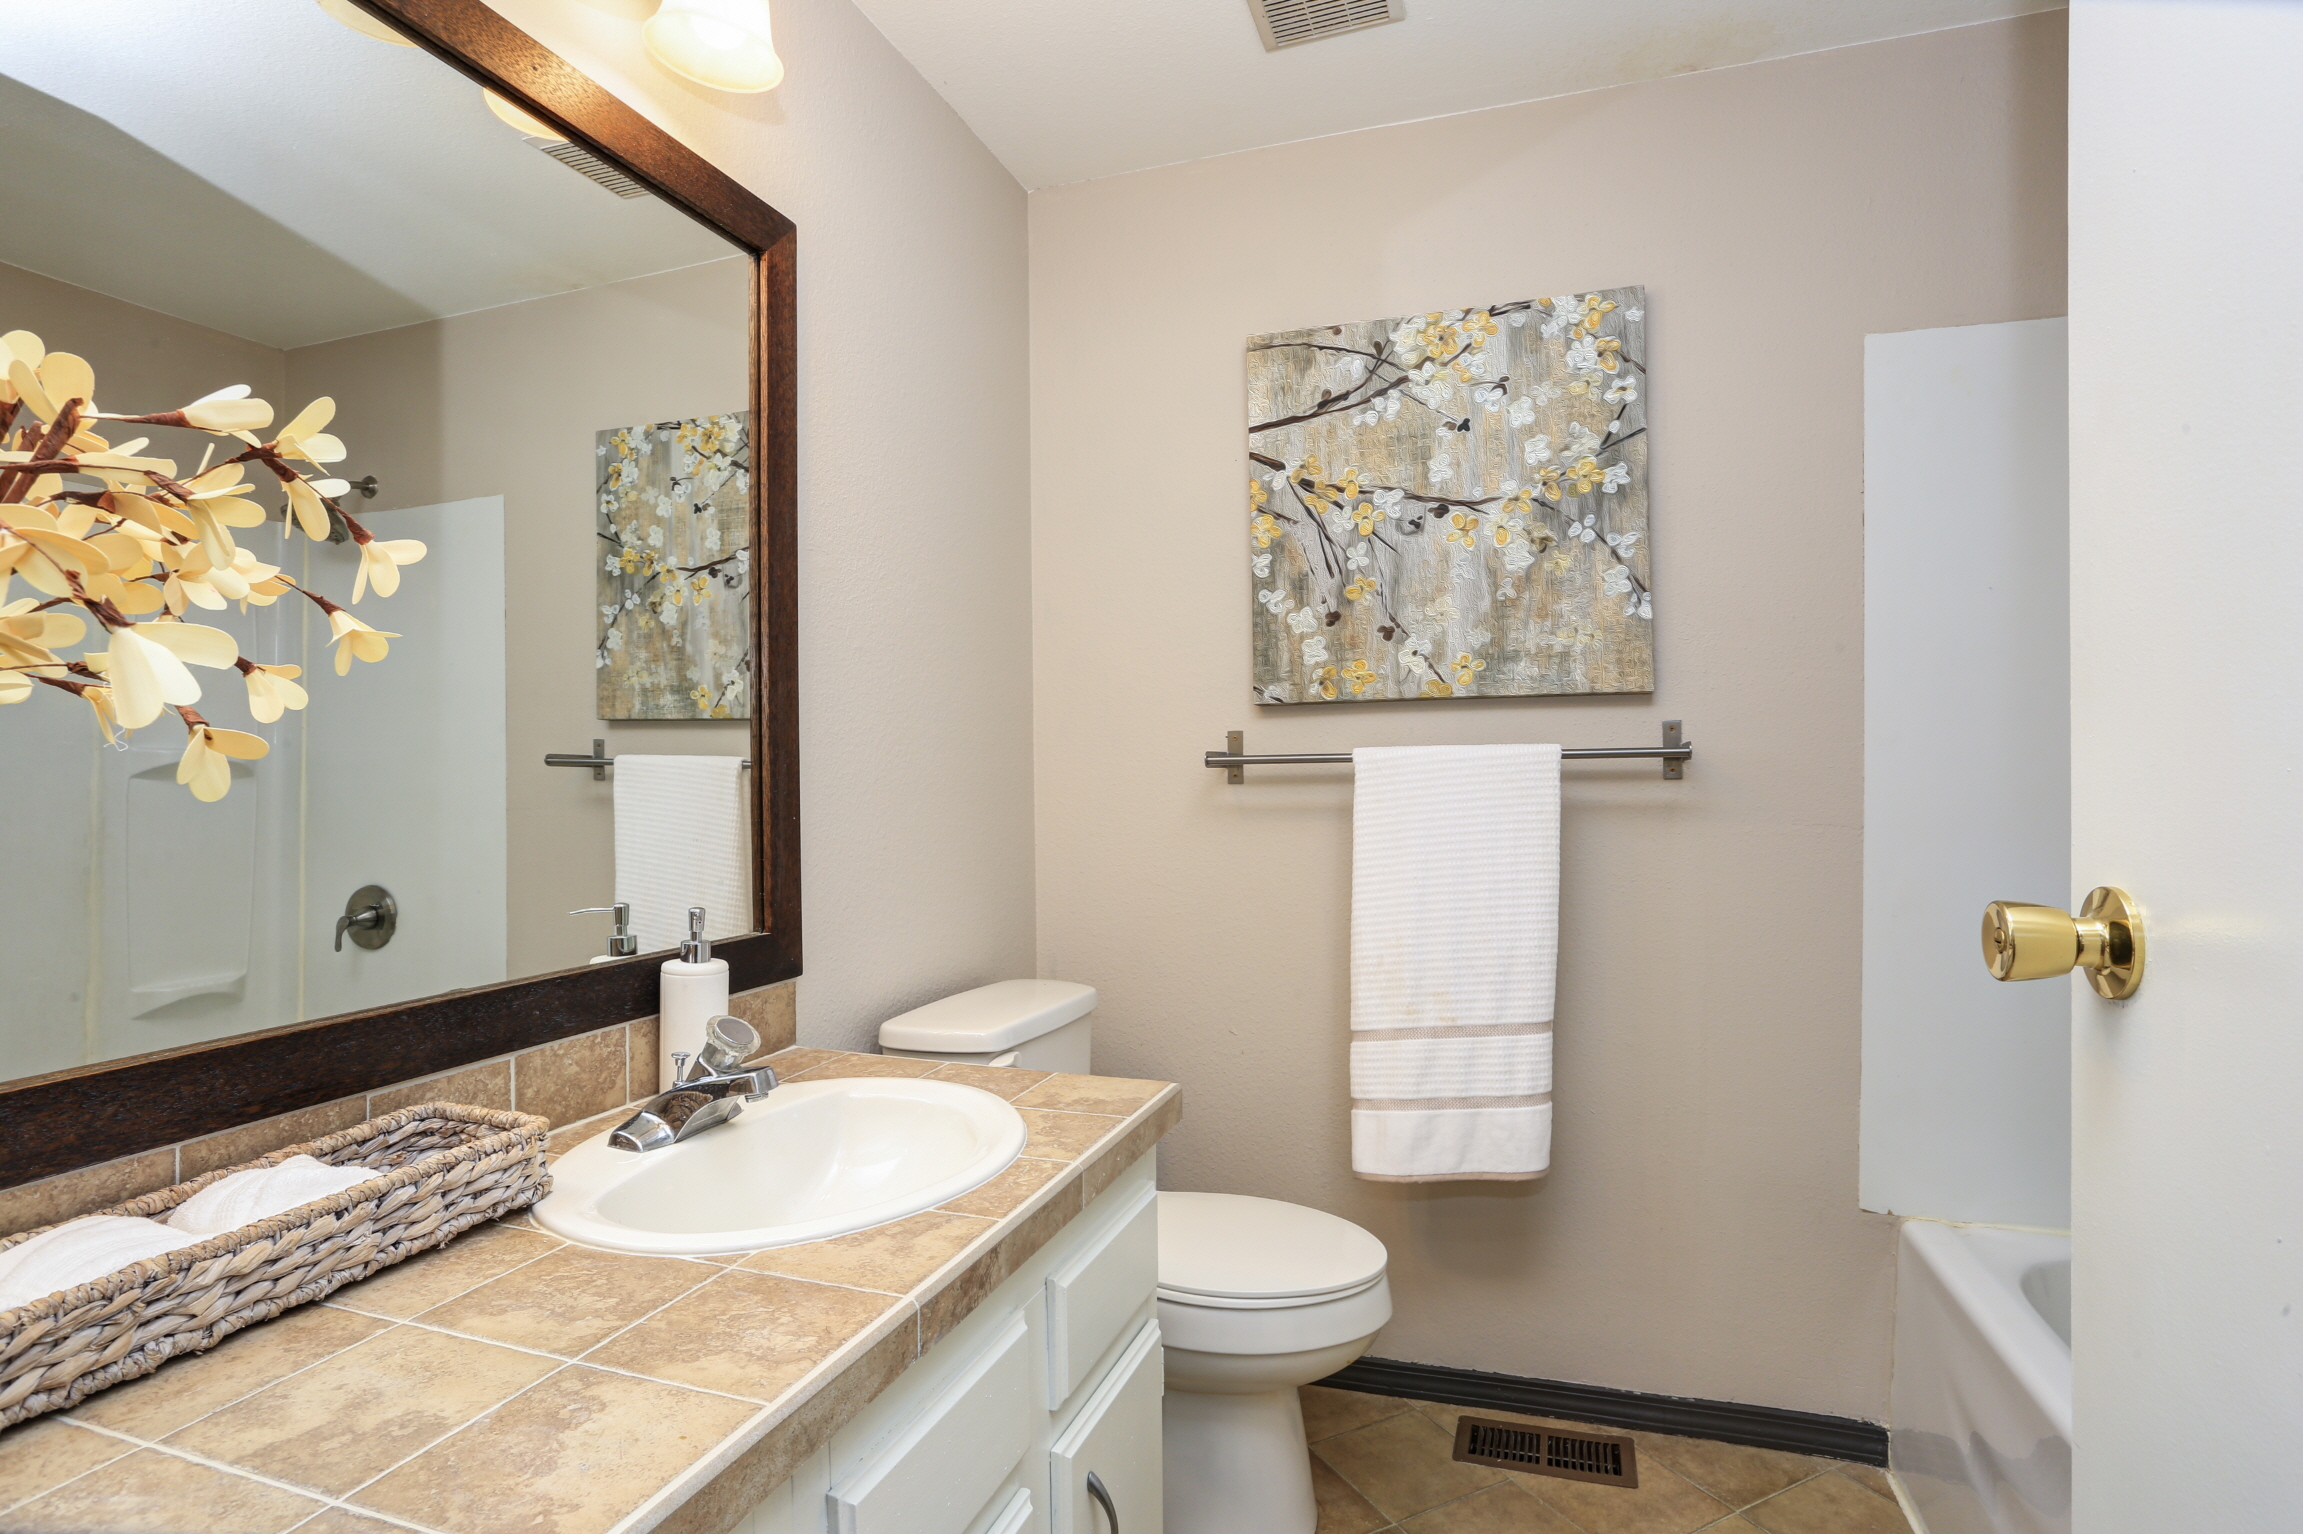 Create a gallery-like bathroom with framed artwork and photos in various sizes and styles to reflect your taste.